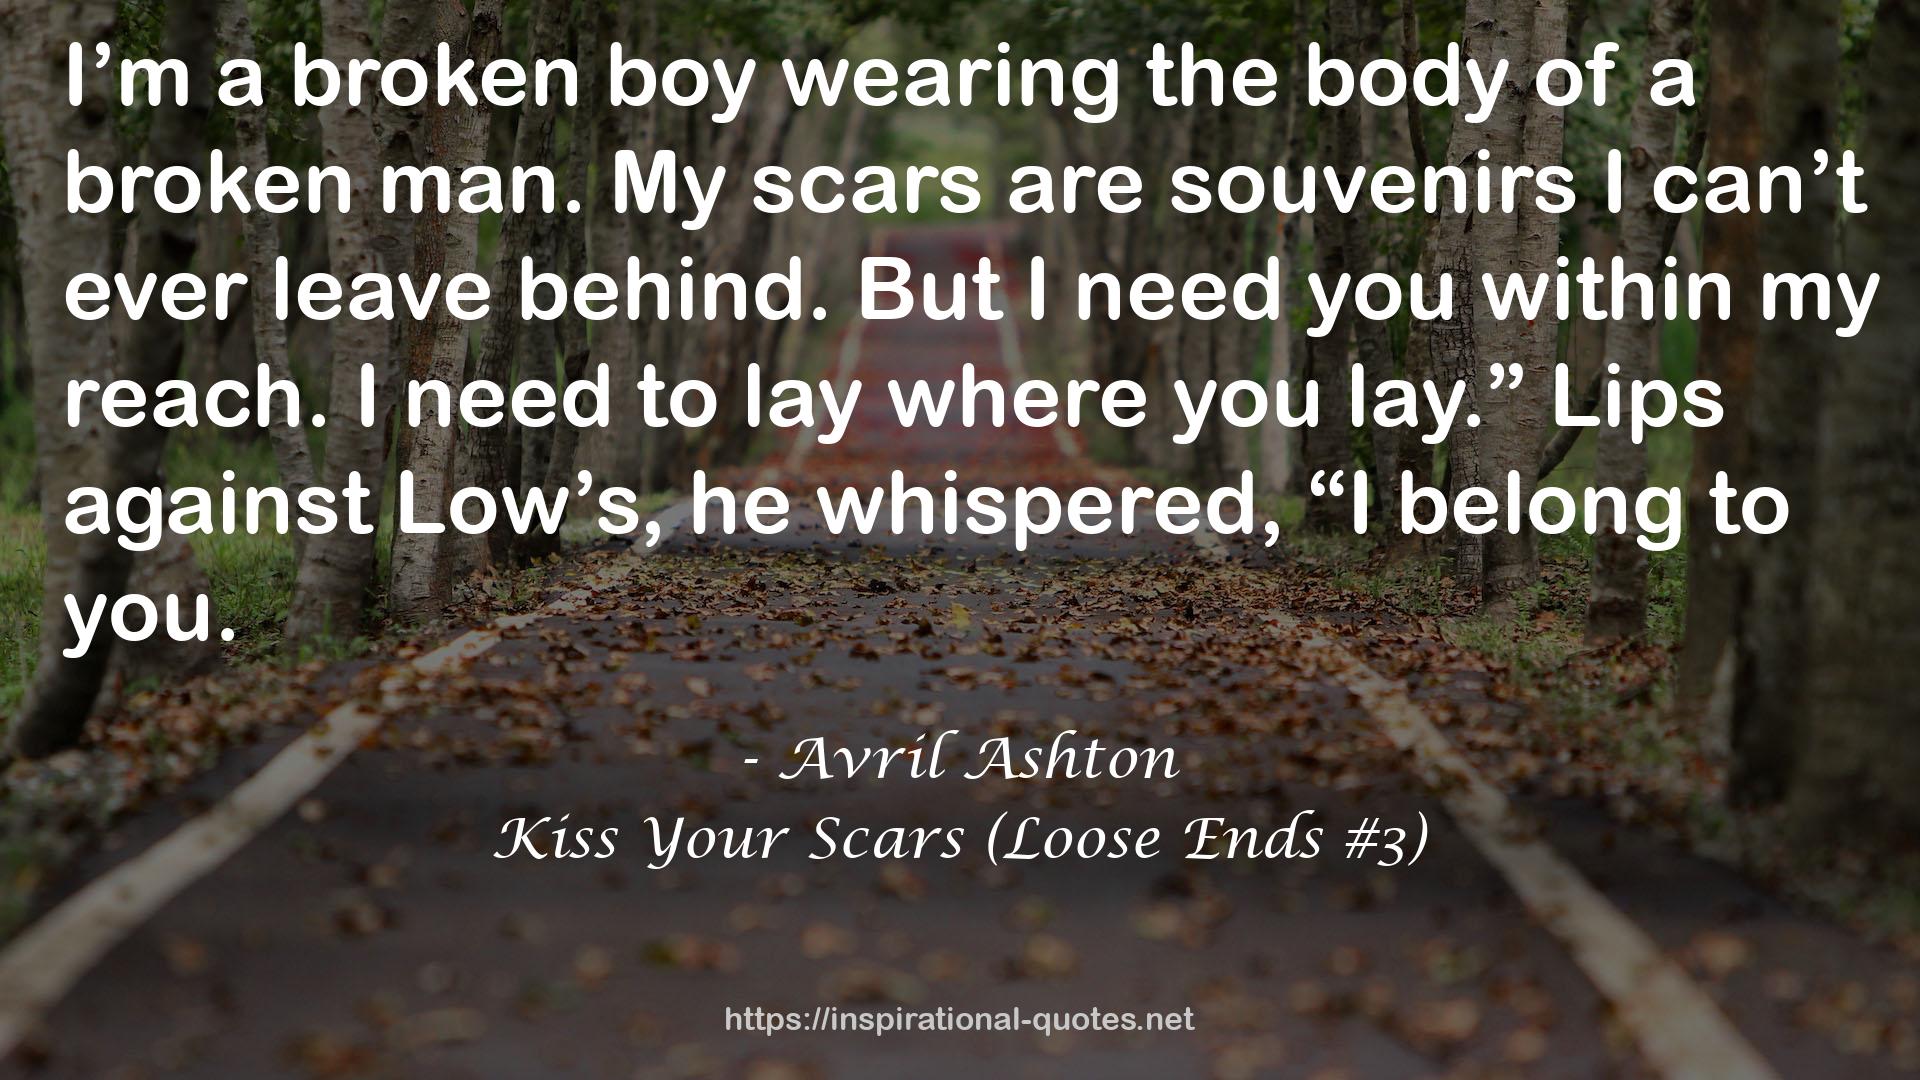 Kiss Your Scars (Loose Ends #3) QUOTES